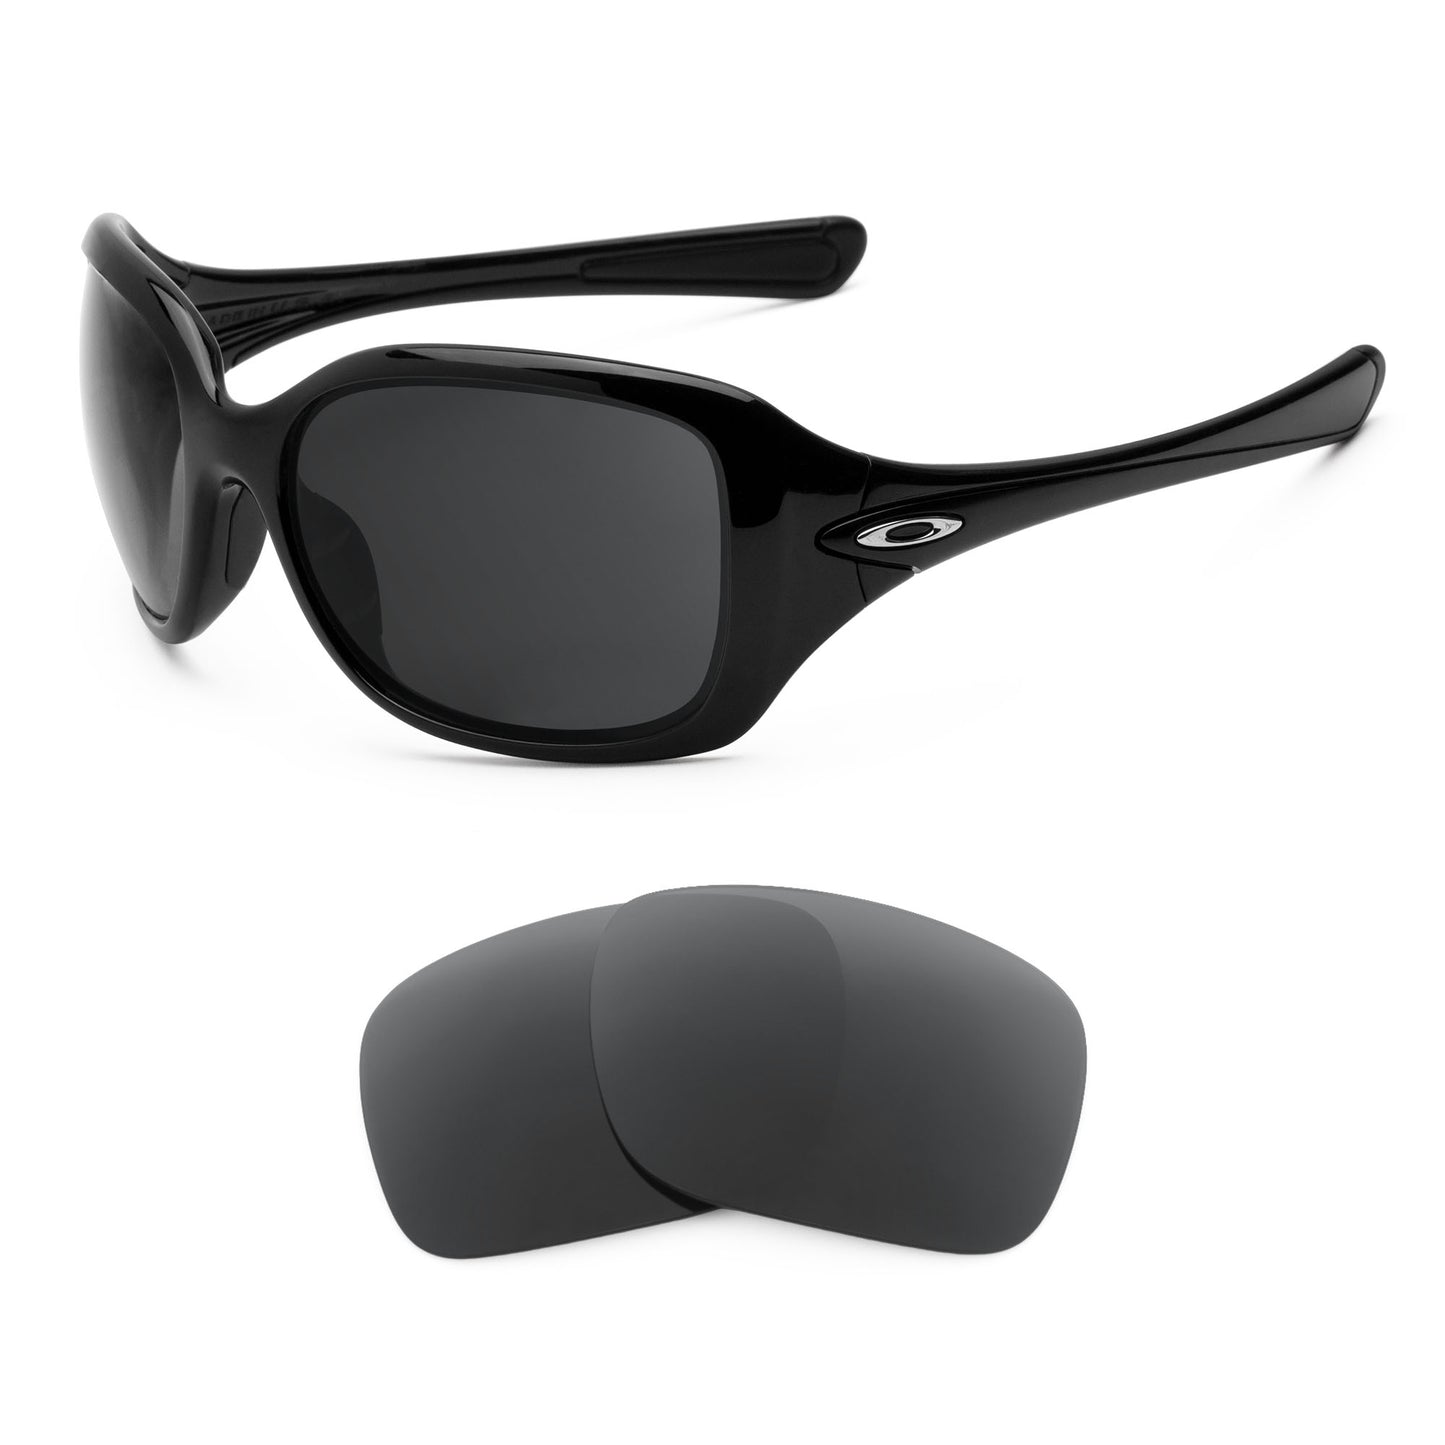 Oakley Necessity sunglasses with replacement lenses